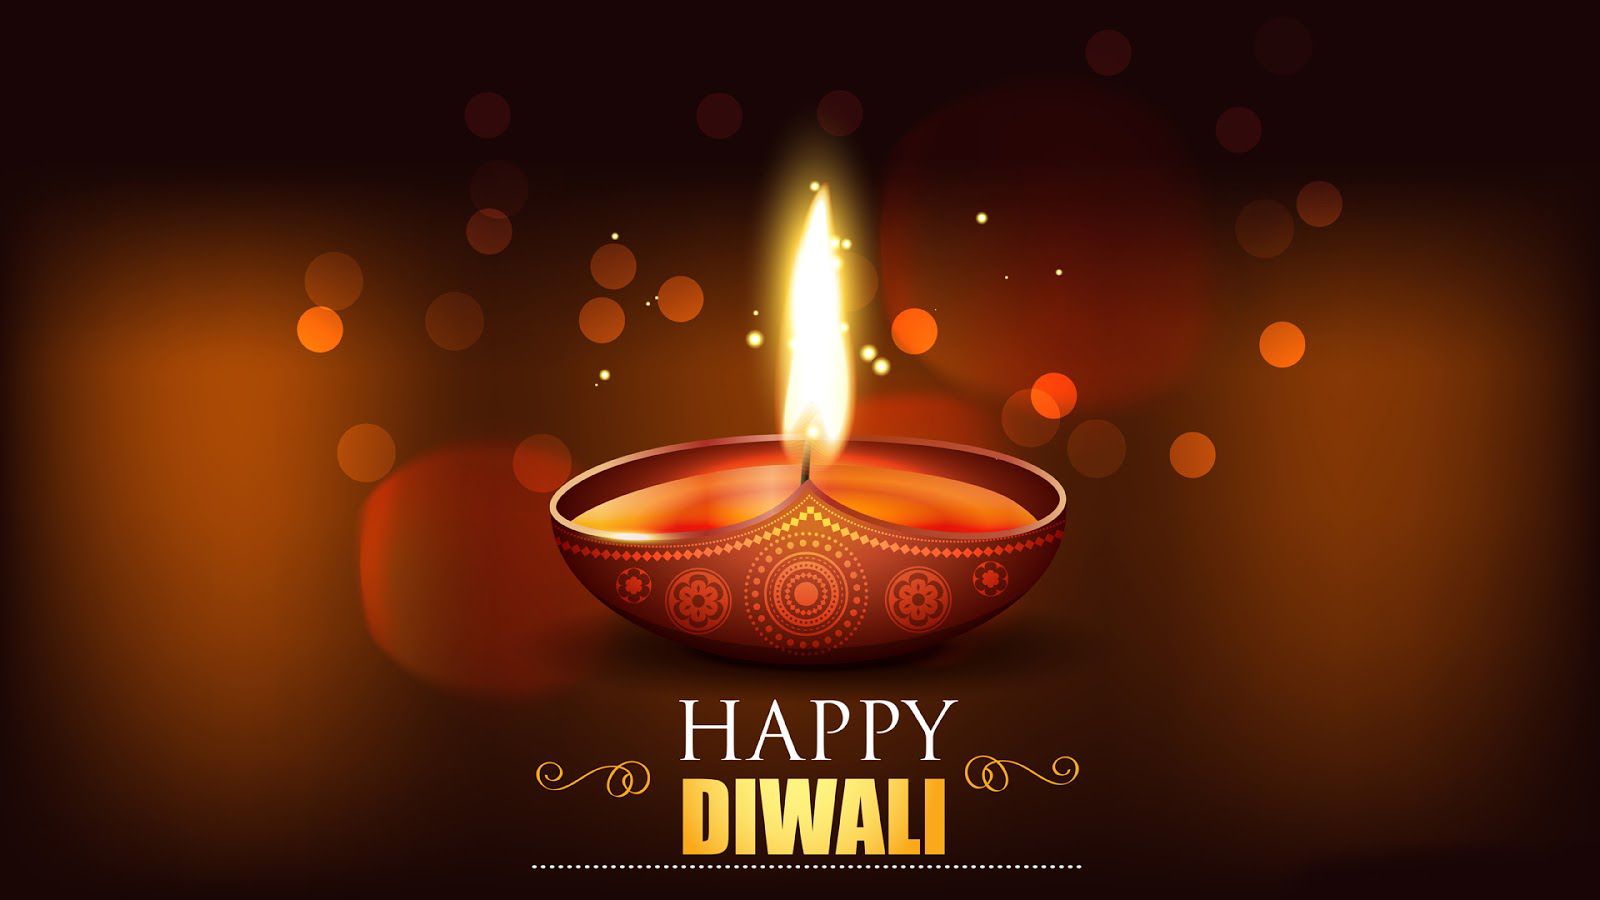 Happy Diwali Status in English for Boyfriend Happy Diwali Status for Girlfriend in English Happy Diwali Status in English for Facebook Happy Diwali Status for Whatsapp Happy Diwali Status for Husband Wishing you a Happy Diwali Status for Wife Best Status on Happy Diwali for Friends Two Line Status on Happy Diwali for GF / BF One Line Short Status on Happy Diwali for Him / Her 1000+ Happy Diwali Status in English for Whatsapp Get the Best Collection of Happy Diwali Status in English for Whatsapp & Facebook only at Updatepedia.com. Send Wishing you a Happy Diwali Status for your Loved ones.